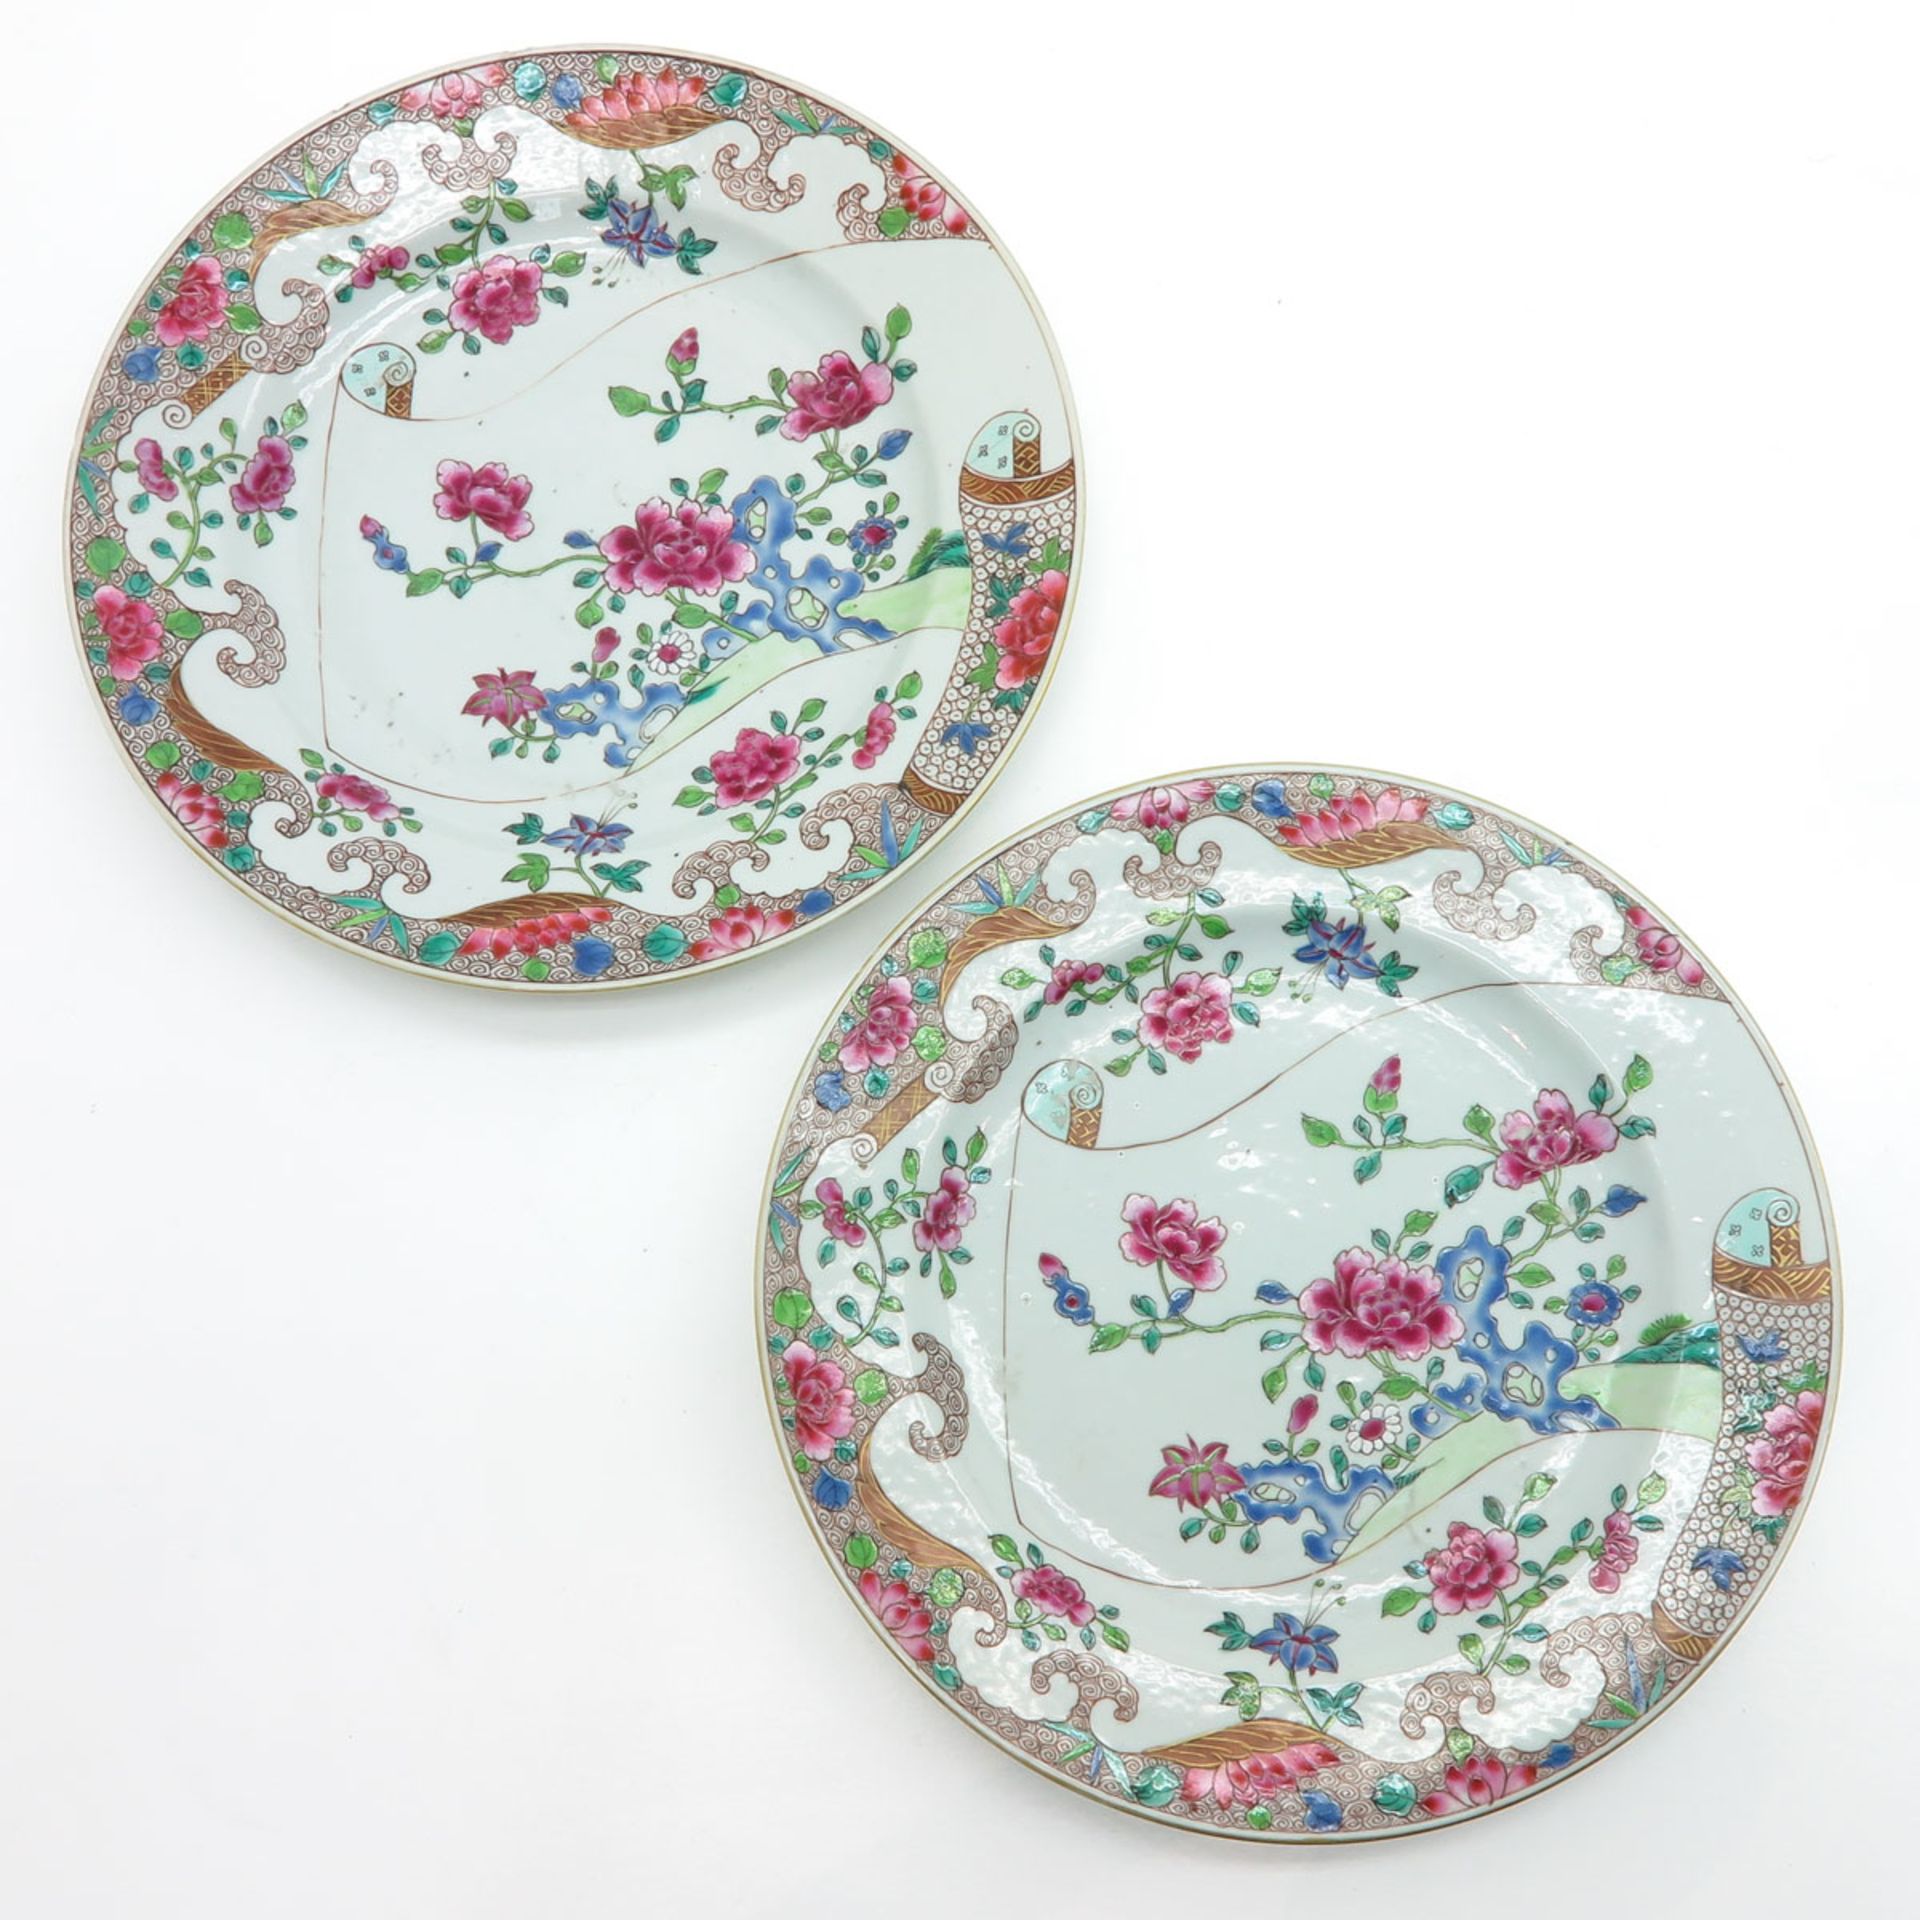 Lot of 2 Plates